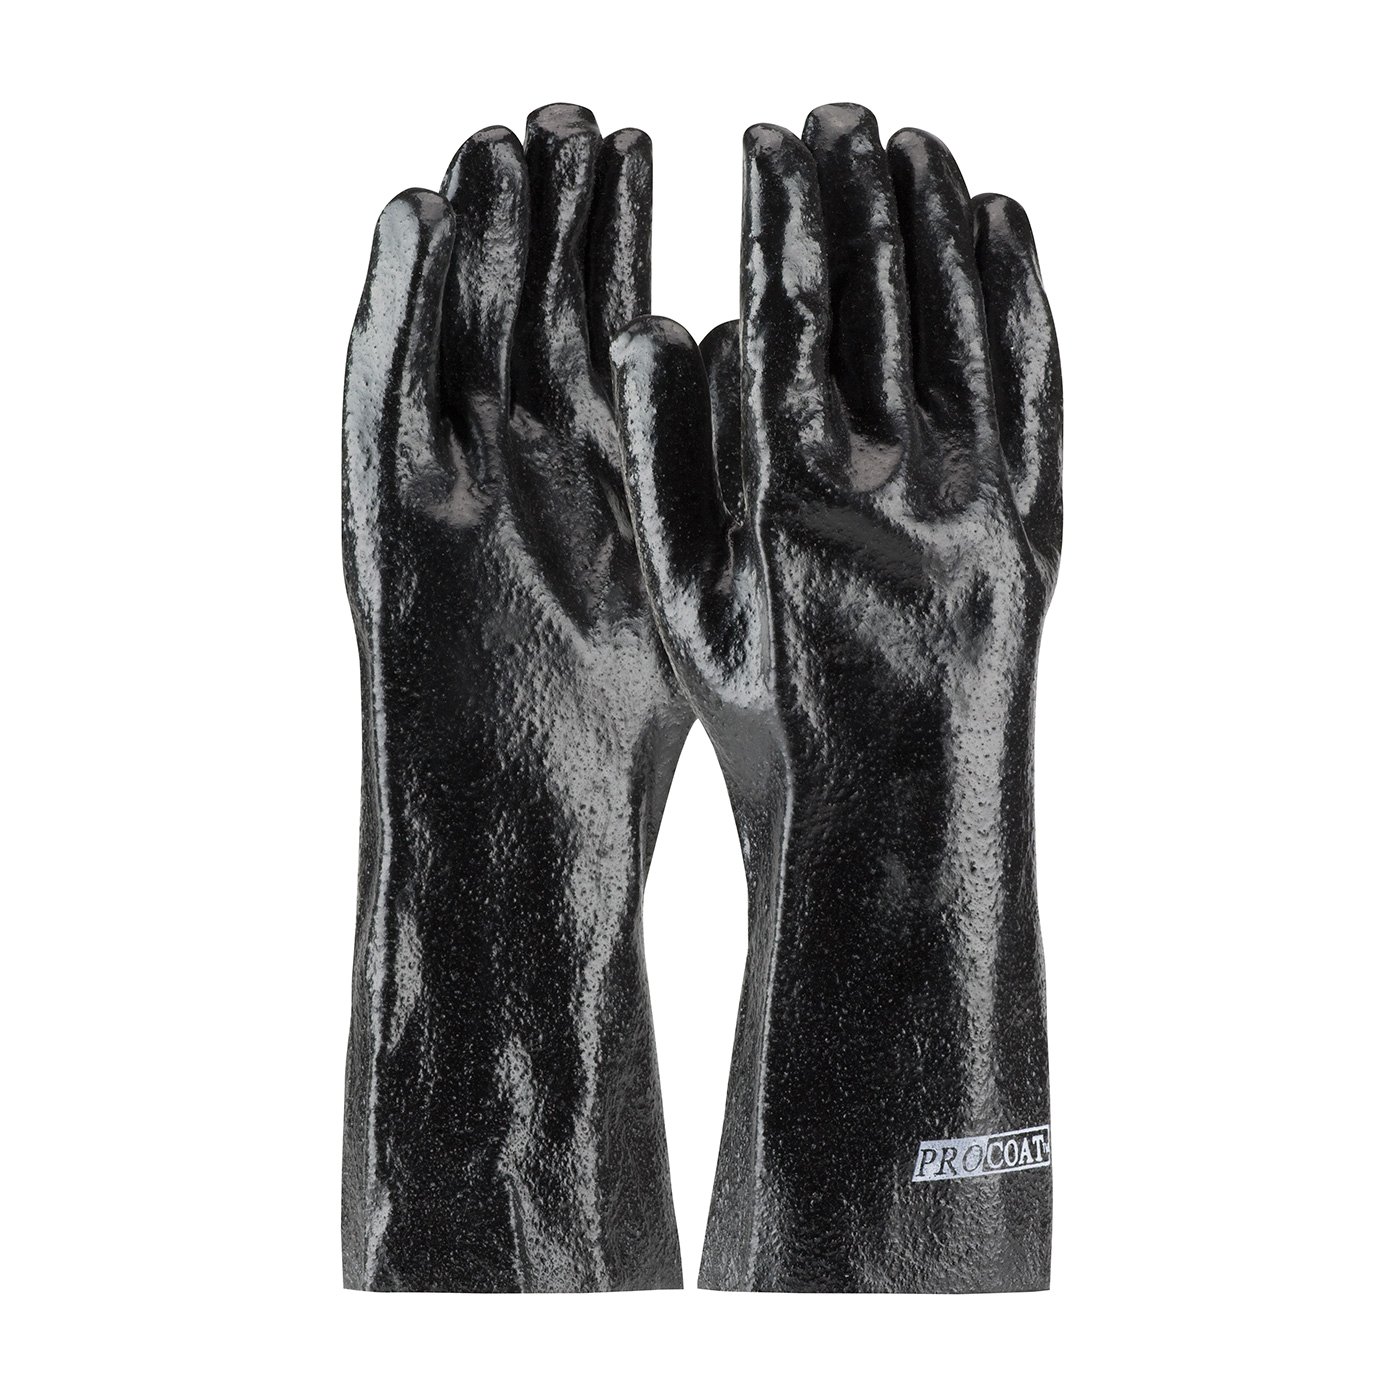 PIP® ProCoat® 58-8040R Men's Single Dipped Chemical-Resistant Gloves, Universal, Cotton/PVC, Black, Cotton Interlock Knit Lining, 14 in L, Resists: Abrasion, Cut, Puncture and Tear, Supported Support, Gauntlet/Straight Cuff